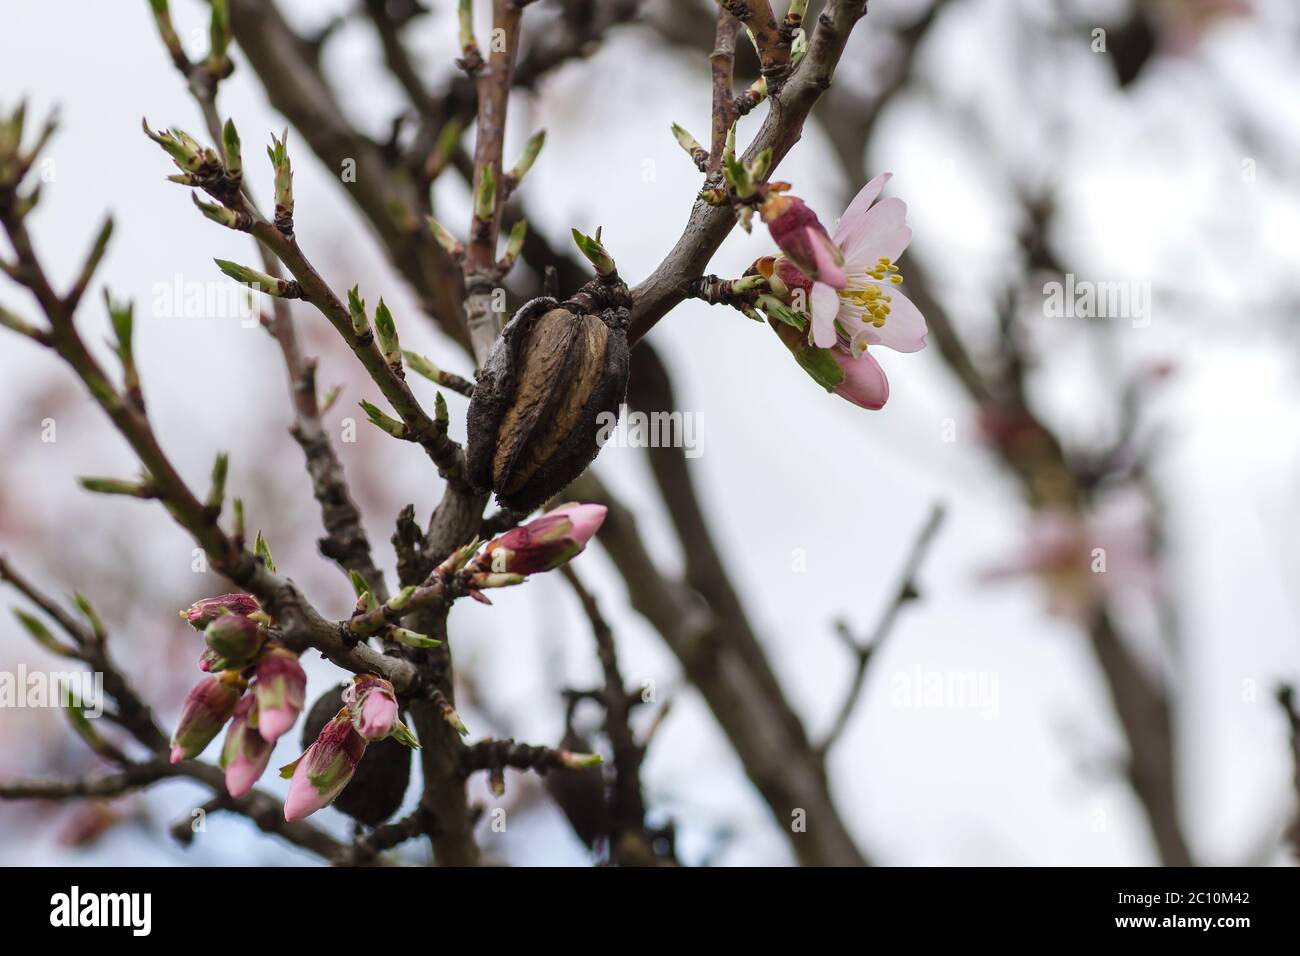 Detail of blossoming prunus dulcis tree with pink flowers and nuts Stock Photo